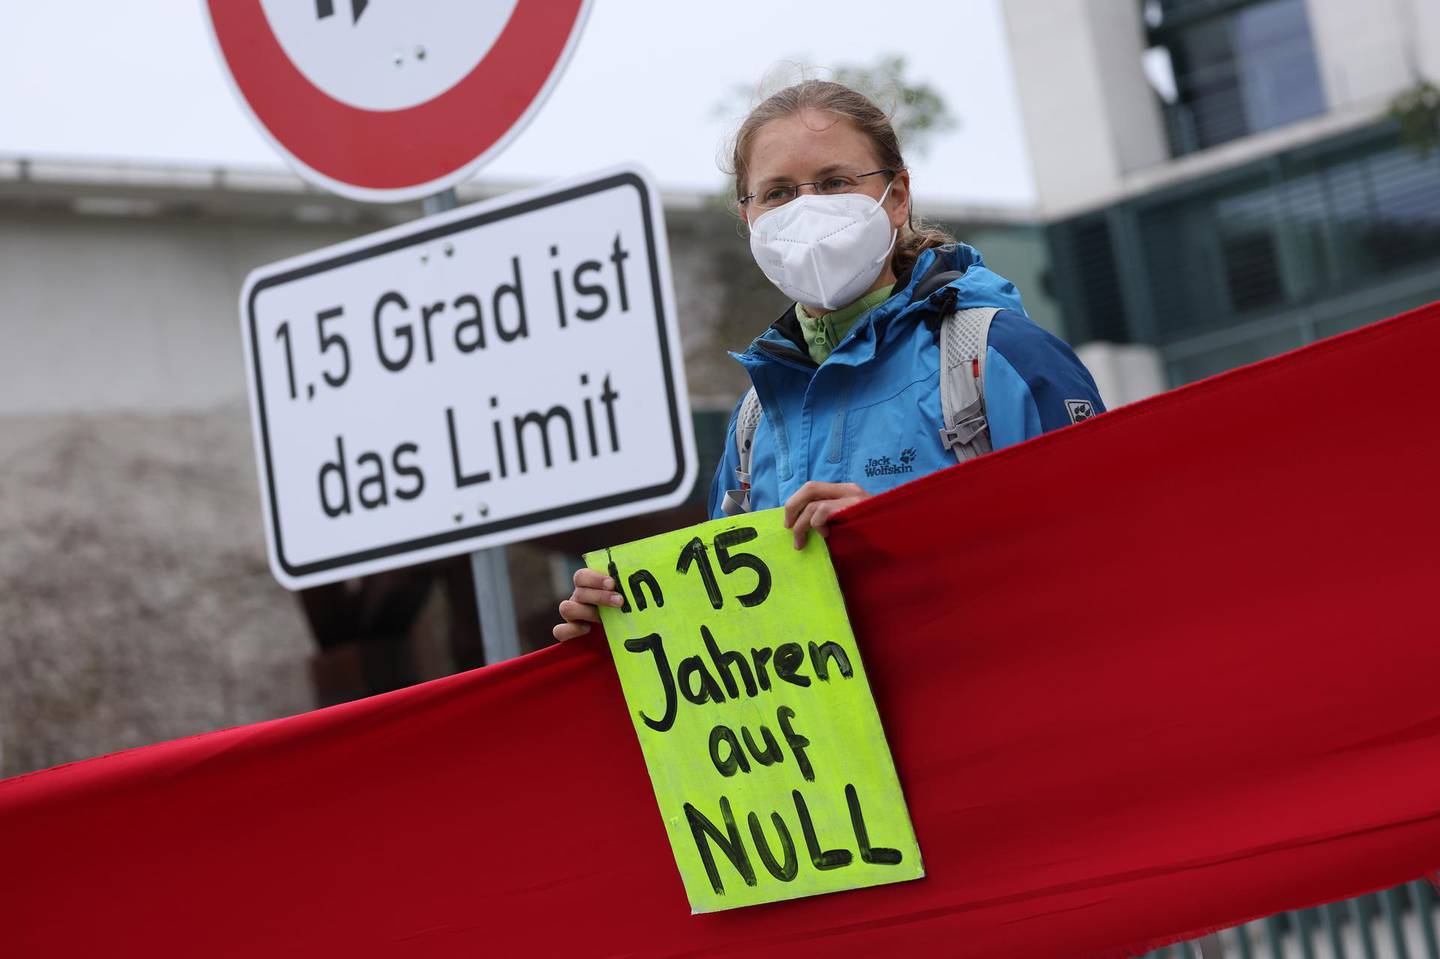 BERLIN, GERMANY - MAY 12: A supporter of the Fridays for Future climate movement holds a sign that reads: "In 15 years to zero" outside the Chancellery where earlier in the day the government cabinet met to agree on amendments to Germany's climate protection law on May 12, 2021 in Berlin, Germany. Germany's Federal Constitutional Court recently ruled that the current law is insufficient in protecting future generations from the consequences of climate change, giving climate activists, including the nine young plaintiffs who brought the suit, a big victory. However many activists are saying the new government commitment of climate neutrality by 2045 is not enough and are demanding the same goal but for 2035. (Photo by Sean Gallup/Getty Images)